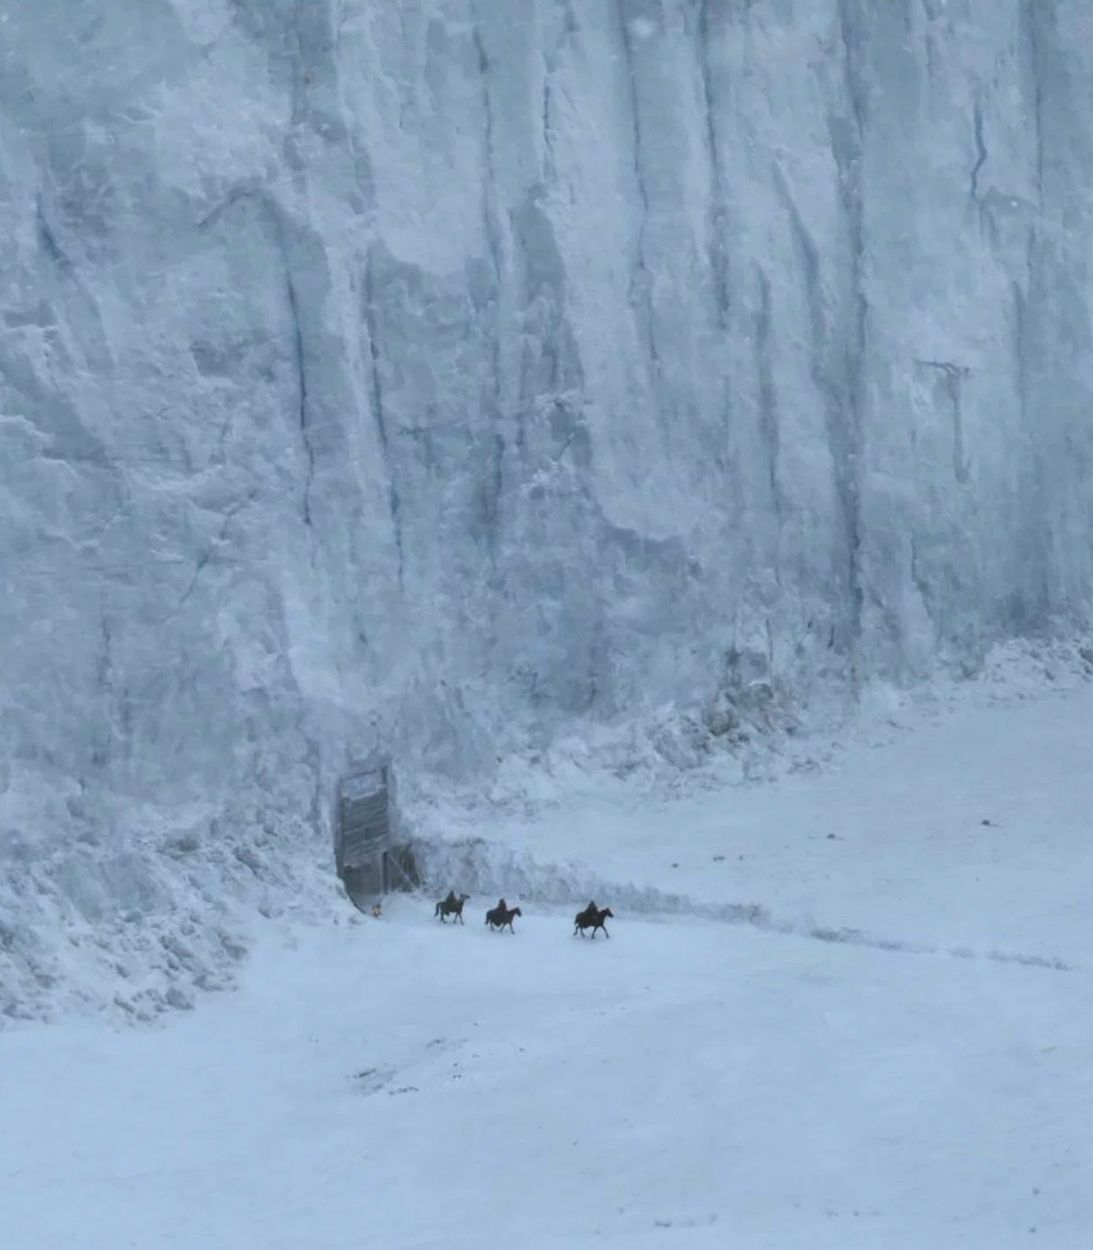 The Wall in Game of Throne Vertical